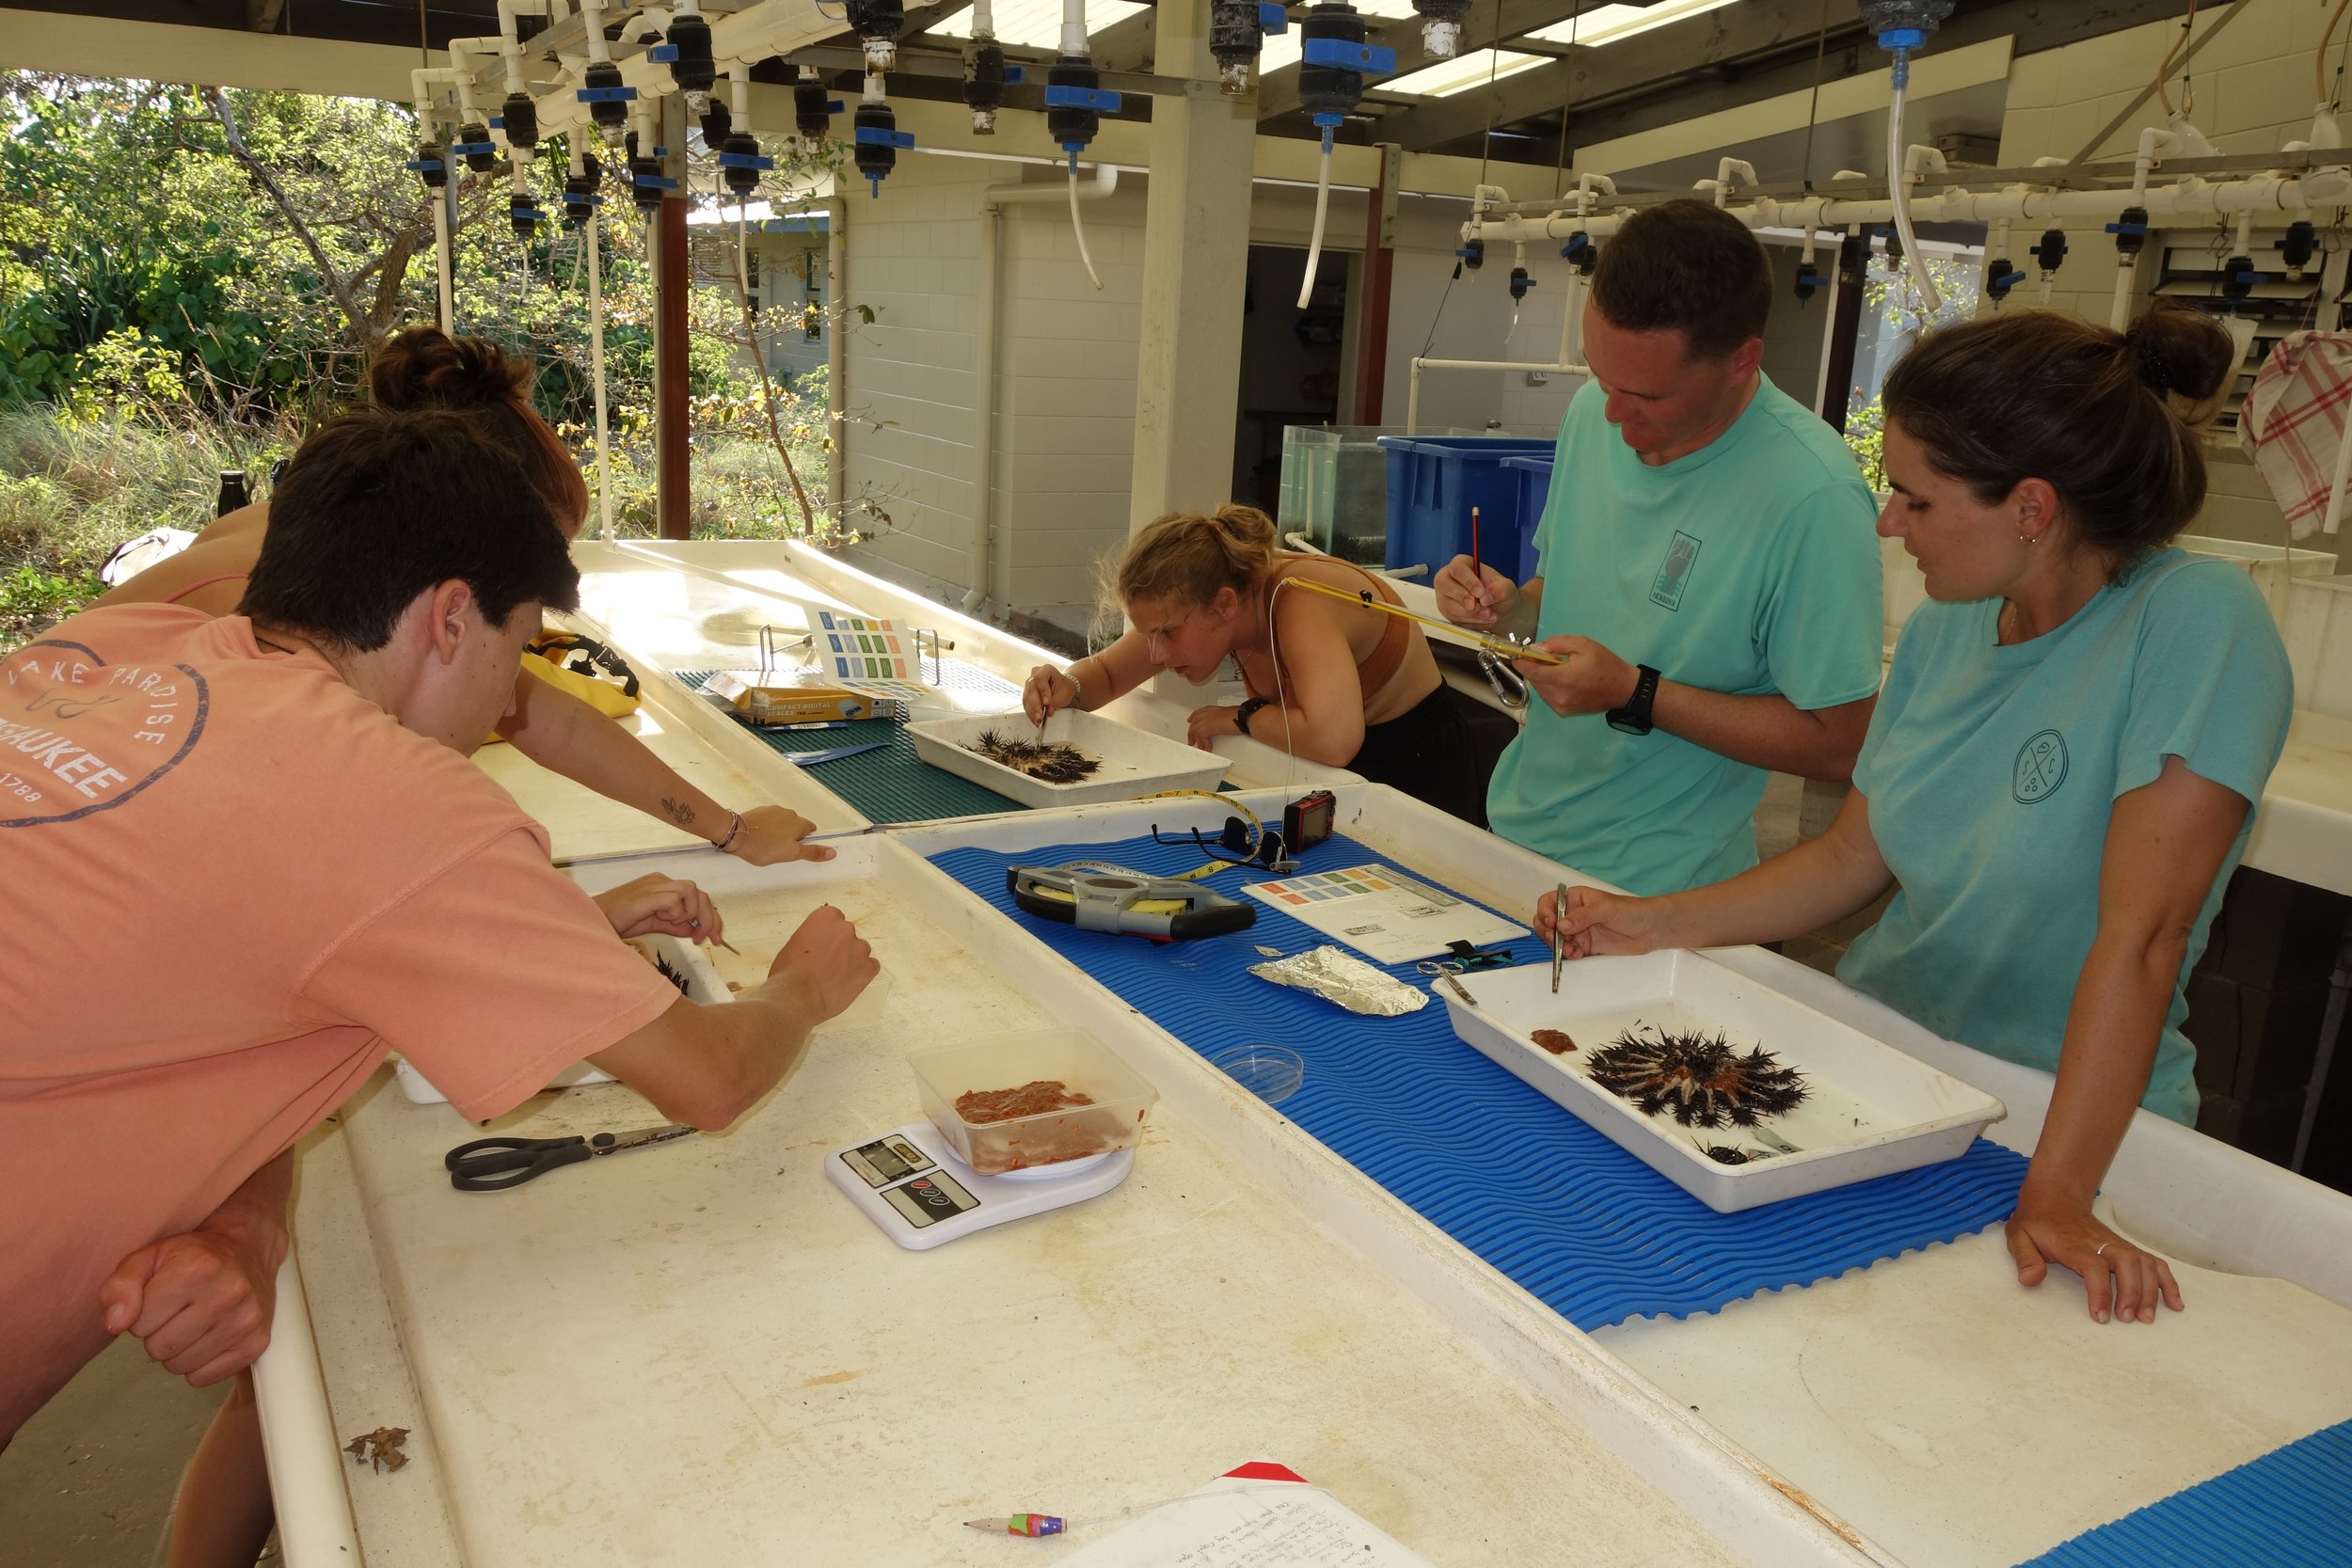  Crown-of-Thorns Starfish research in the aquarium at LIRS.  